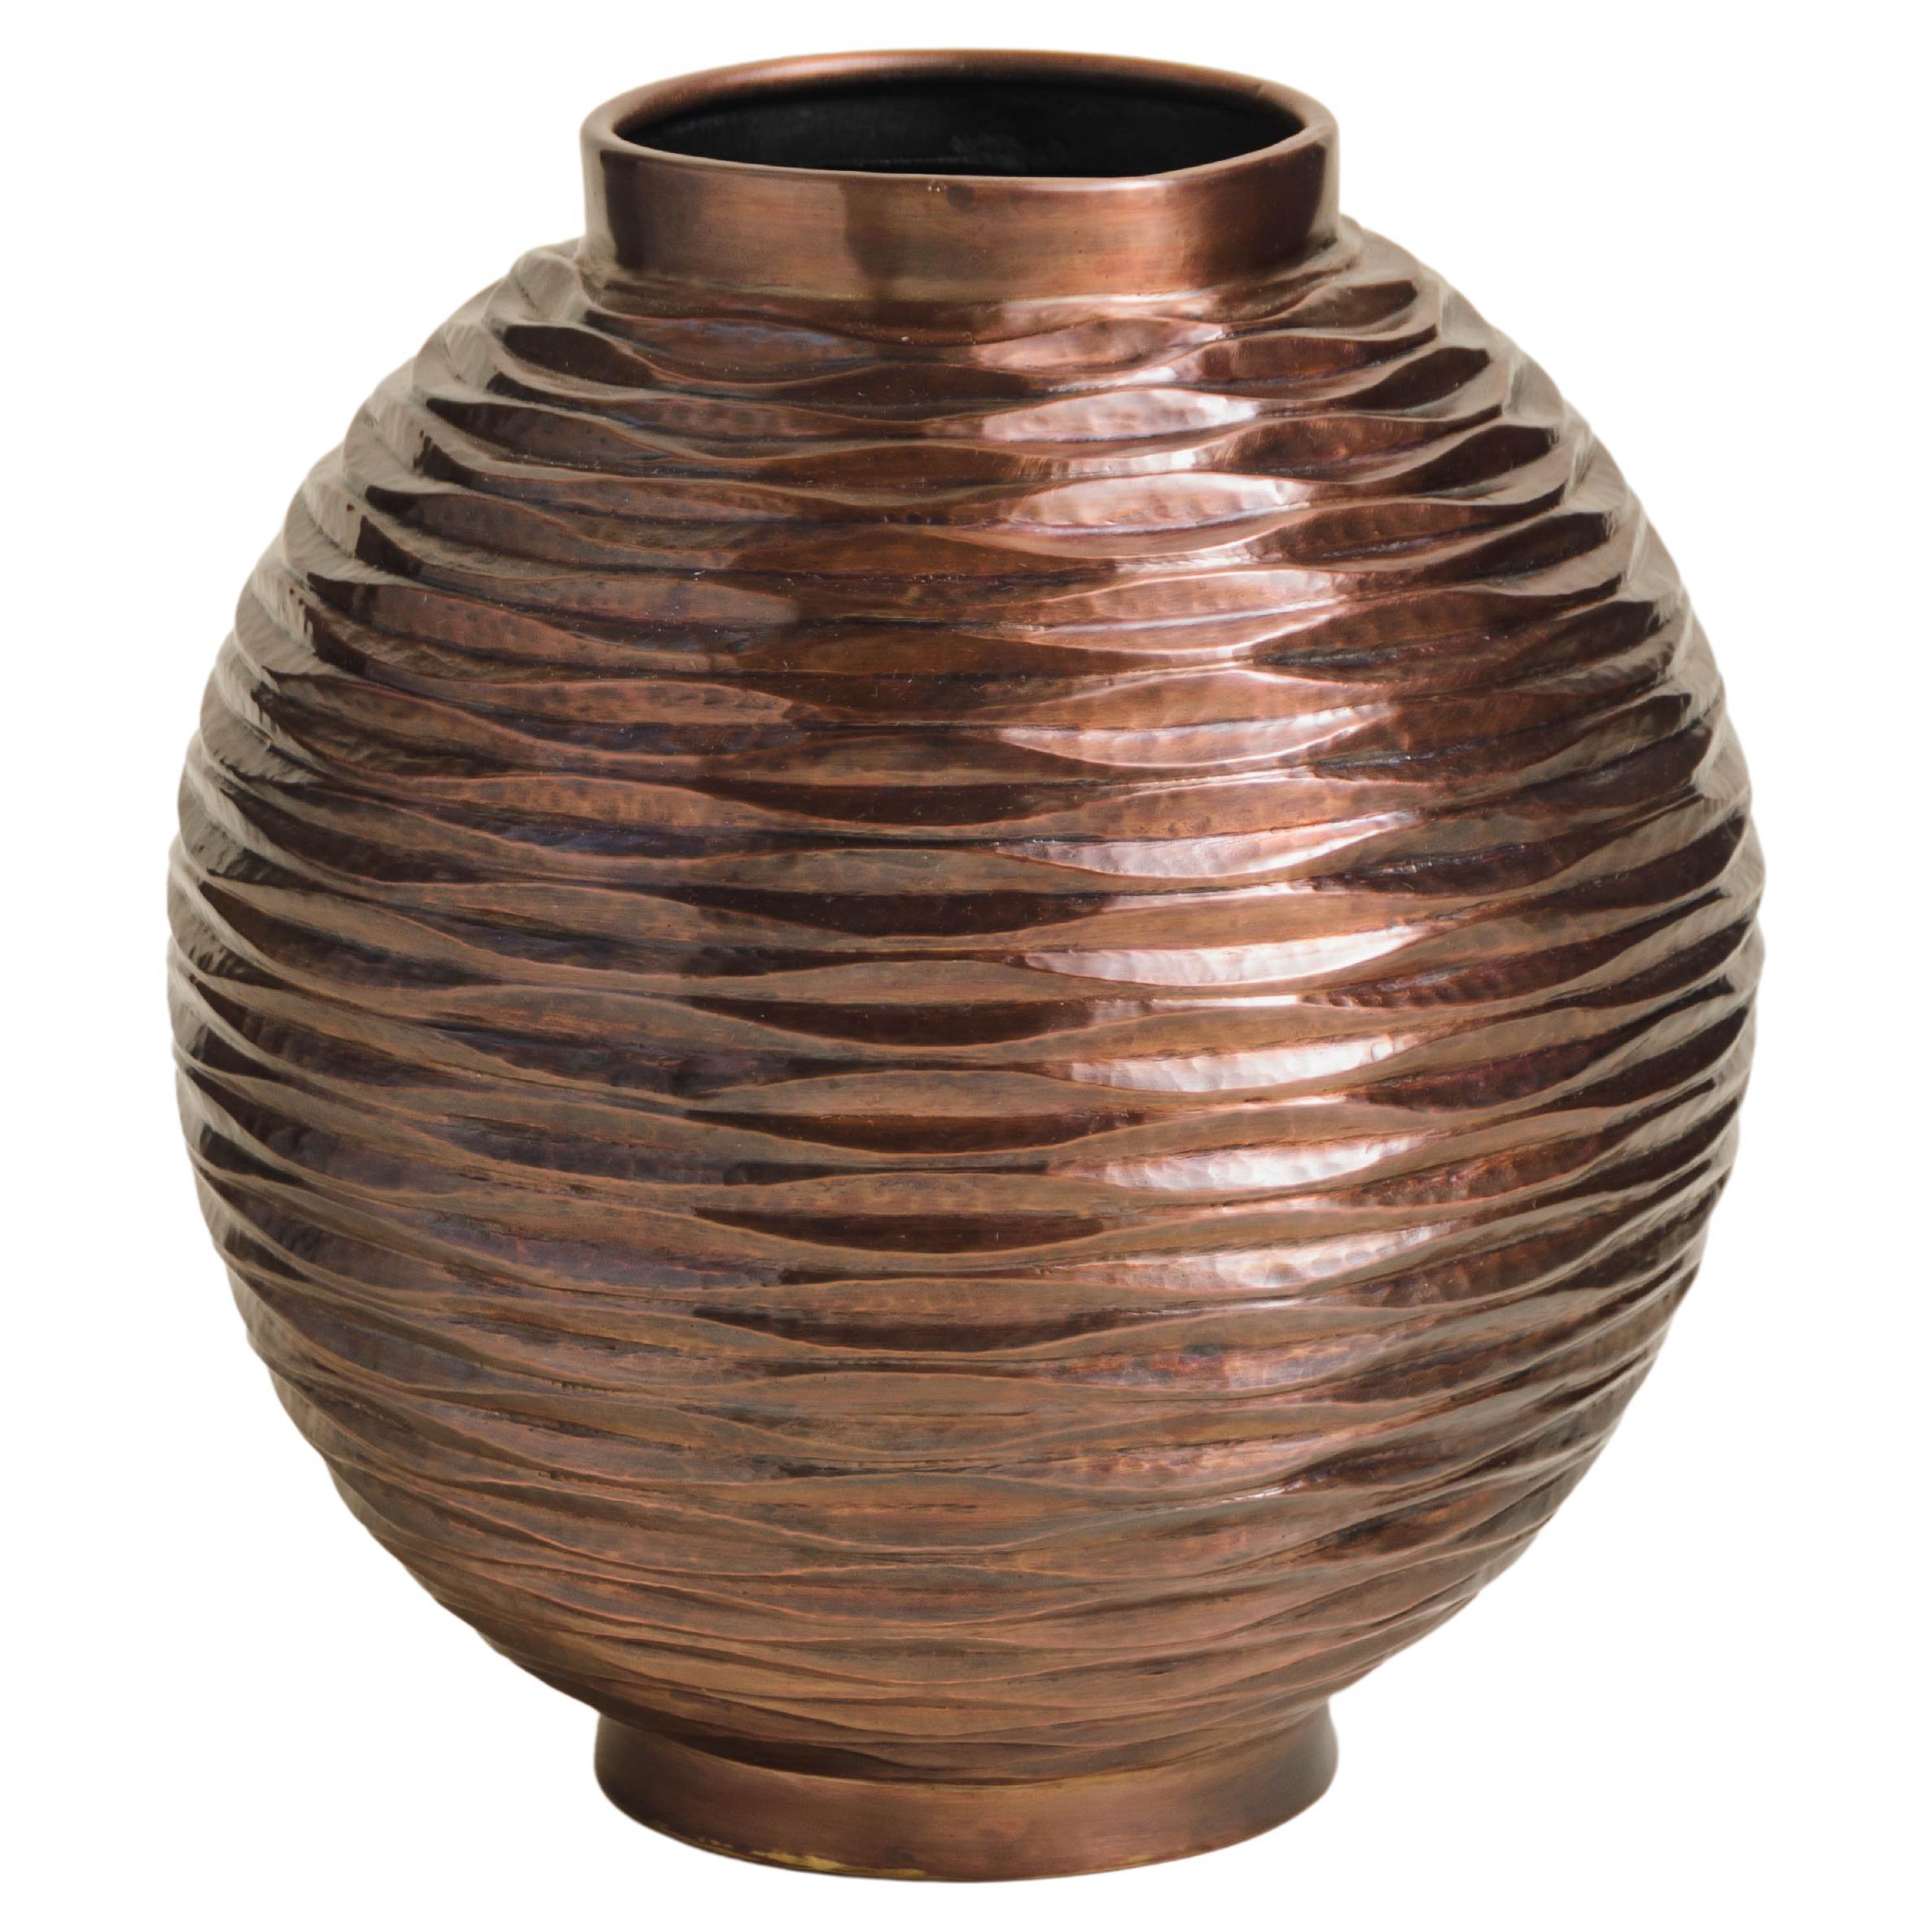 Contemporary Repousse Ju Wen Jarlet in Antique Copper by Robert Kuo